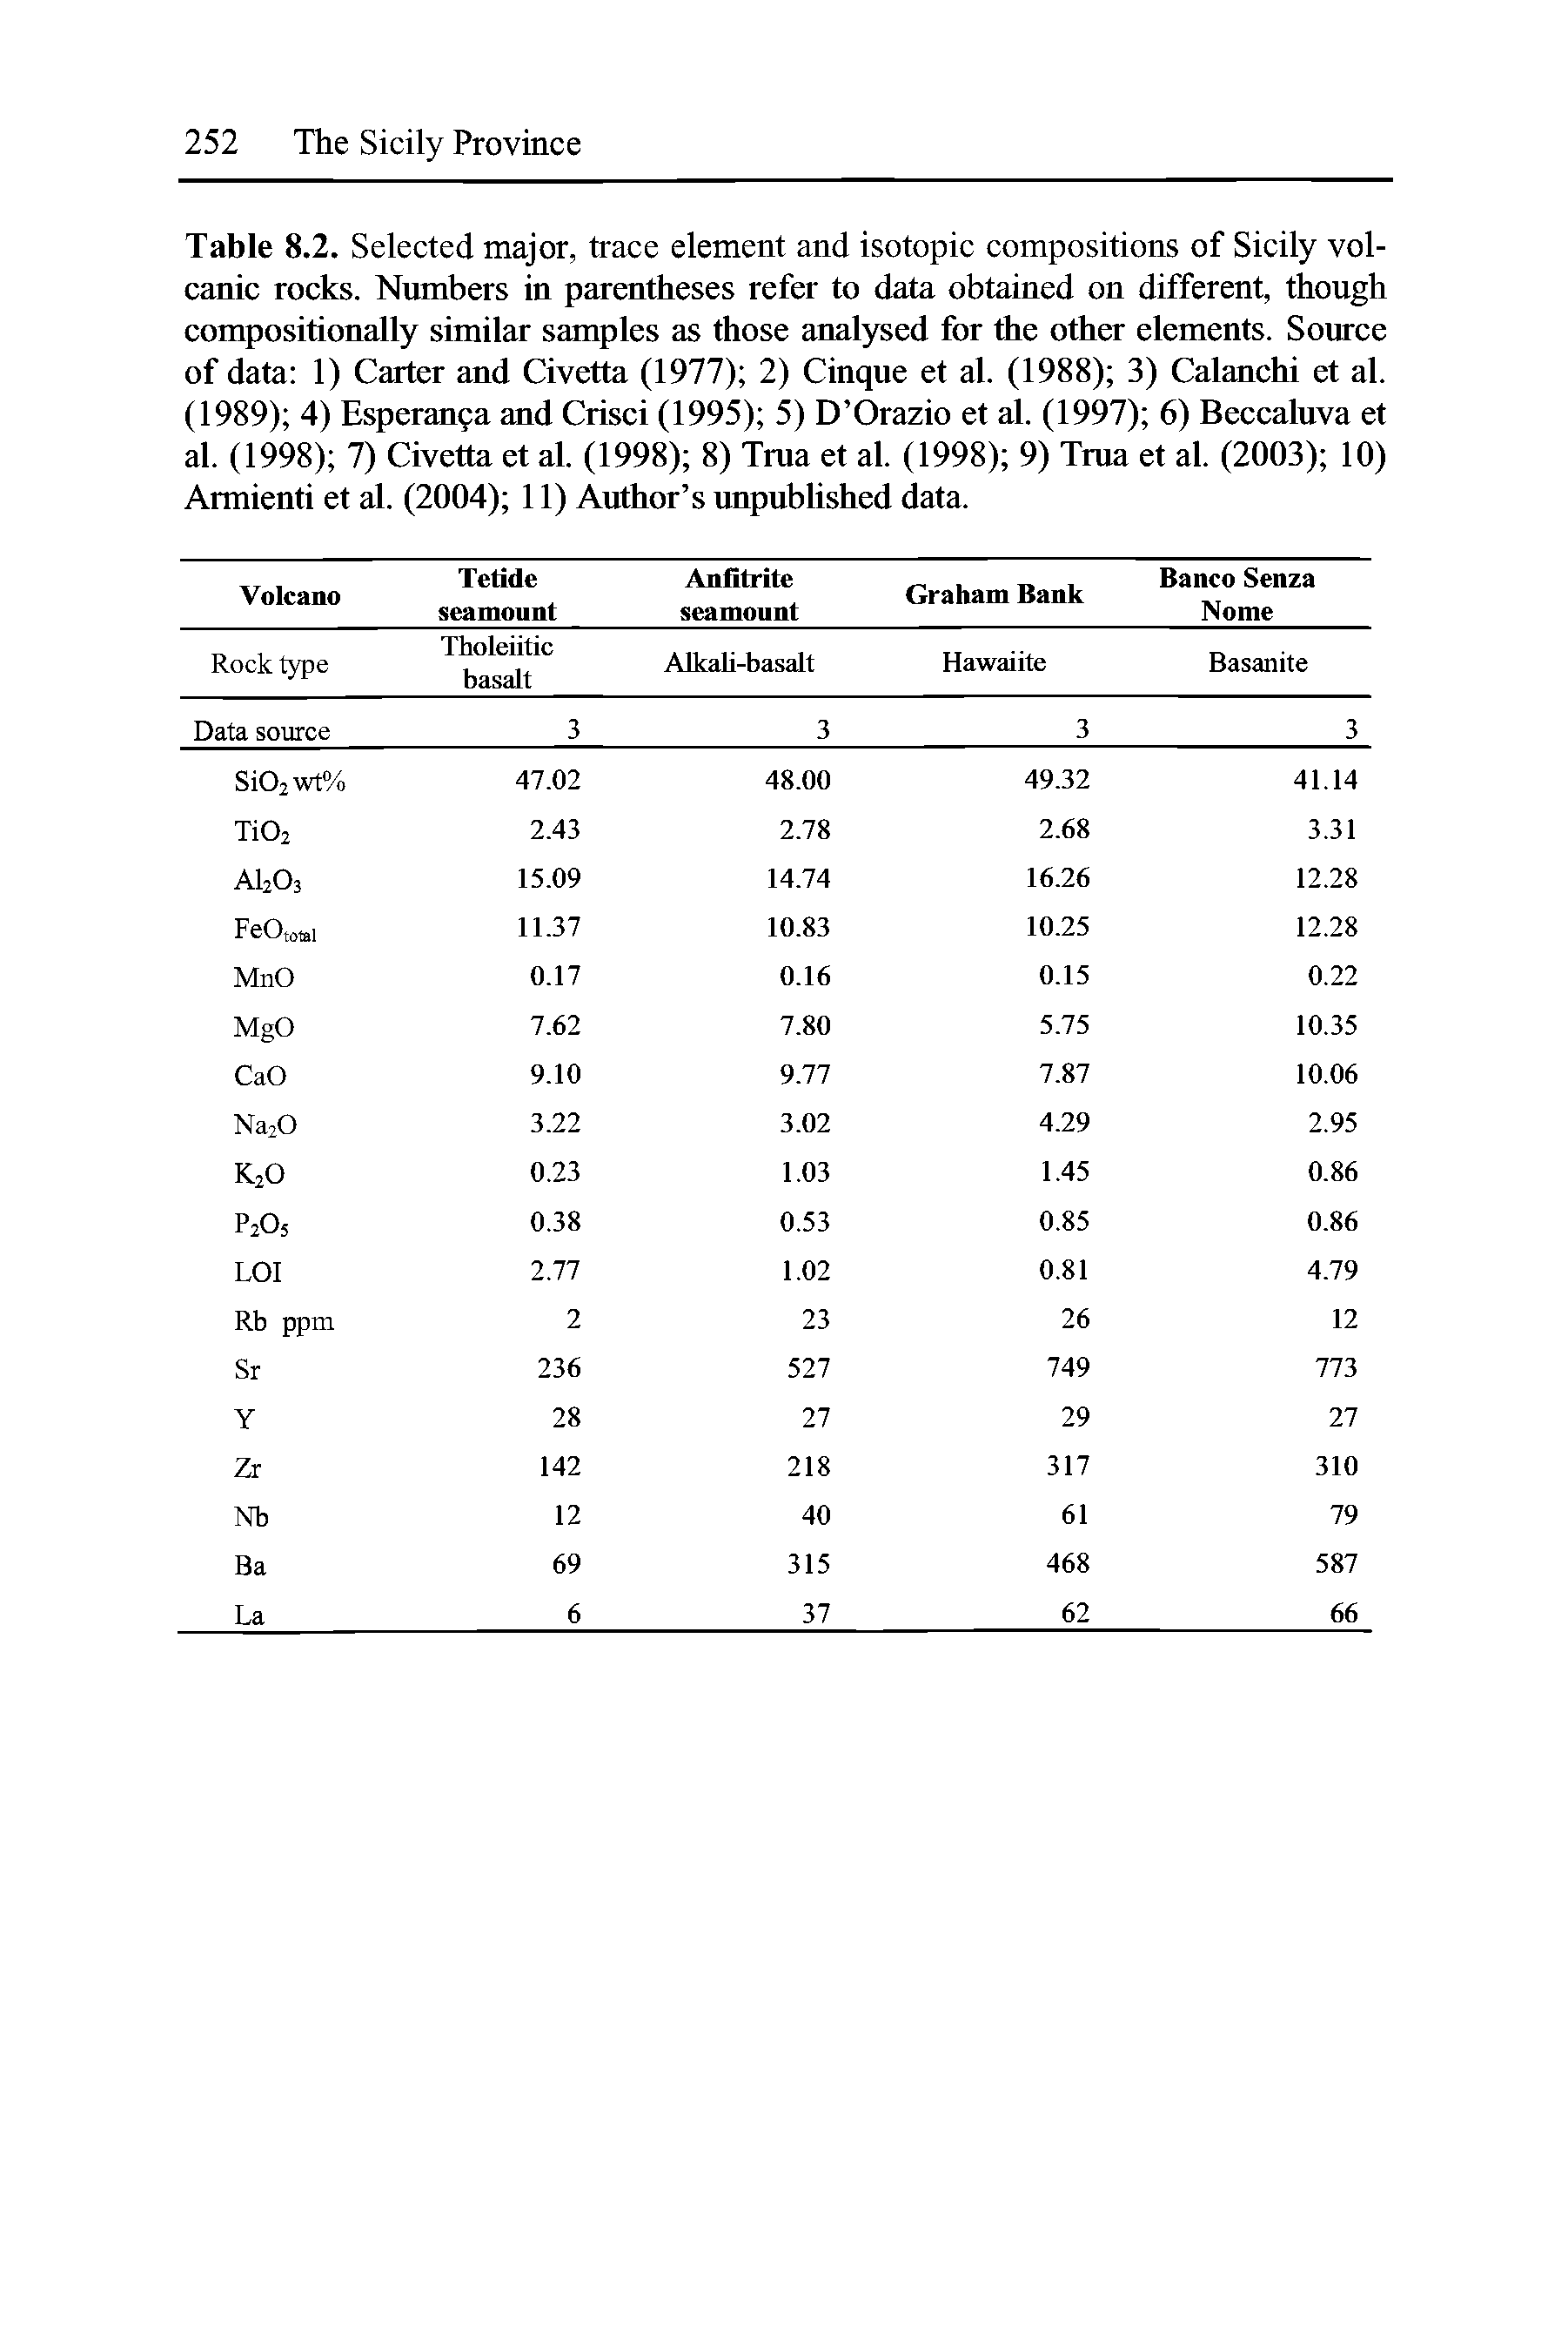 Table 8.2. Selected major, trace element and isotopic compositions of Sicily volcanic rocks. Numbers in parentheses refer to data obtained on different, though compositionally similar samples as those analysed for the other elements. Source of data 1) Carter and Civetta (1977) 2) Cinque et al. (1988) 3) Calanchi et al. (1989) 4) Espcranga and Crisci (1995) 5) D Orazio et al. (1997) 6) Beccaluva et al. (1998) 7) Civetta et al. (1998) 8) Trua et al. (1998) 9) Trua et al. (2003) 10) Armienti et al. (2004) 11) Author s unpublished data. ...